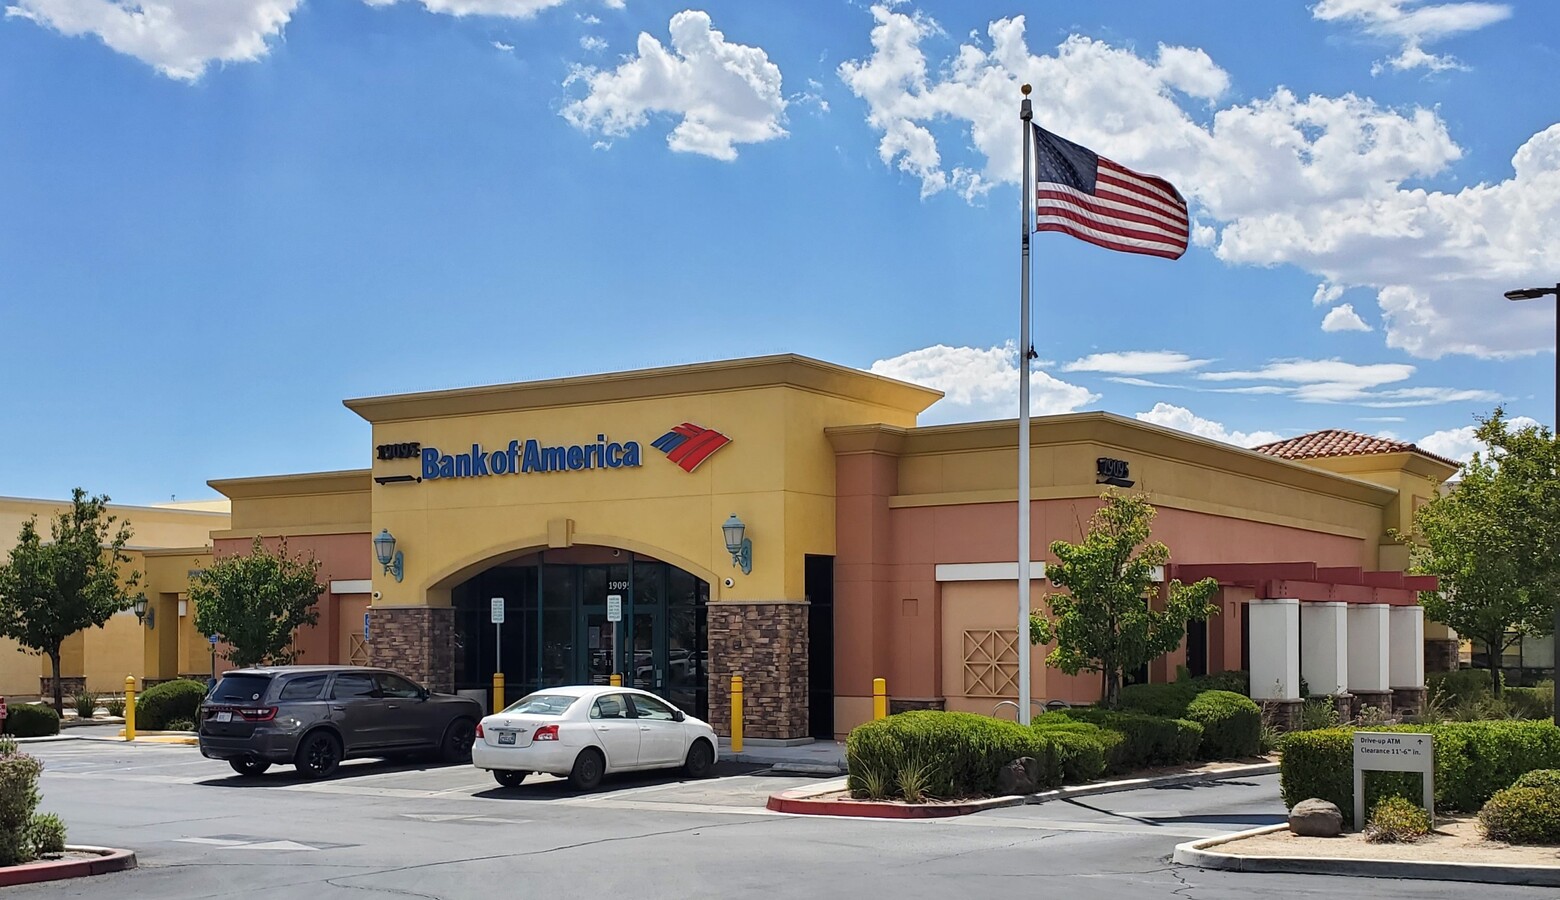 Apple Valley Bank of America net lease selling for $3.9 Million